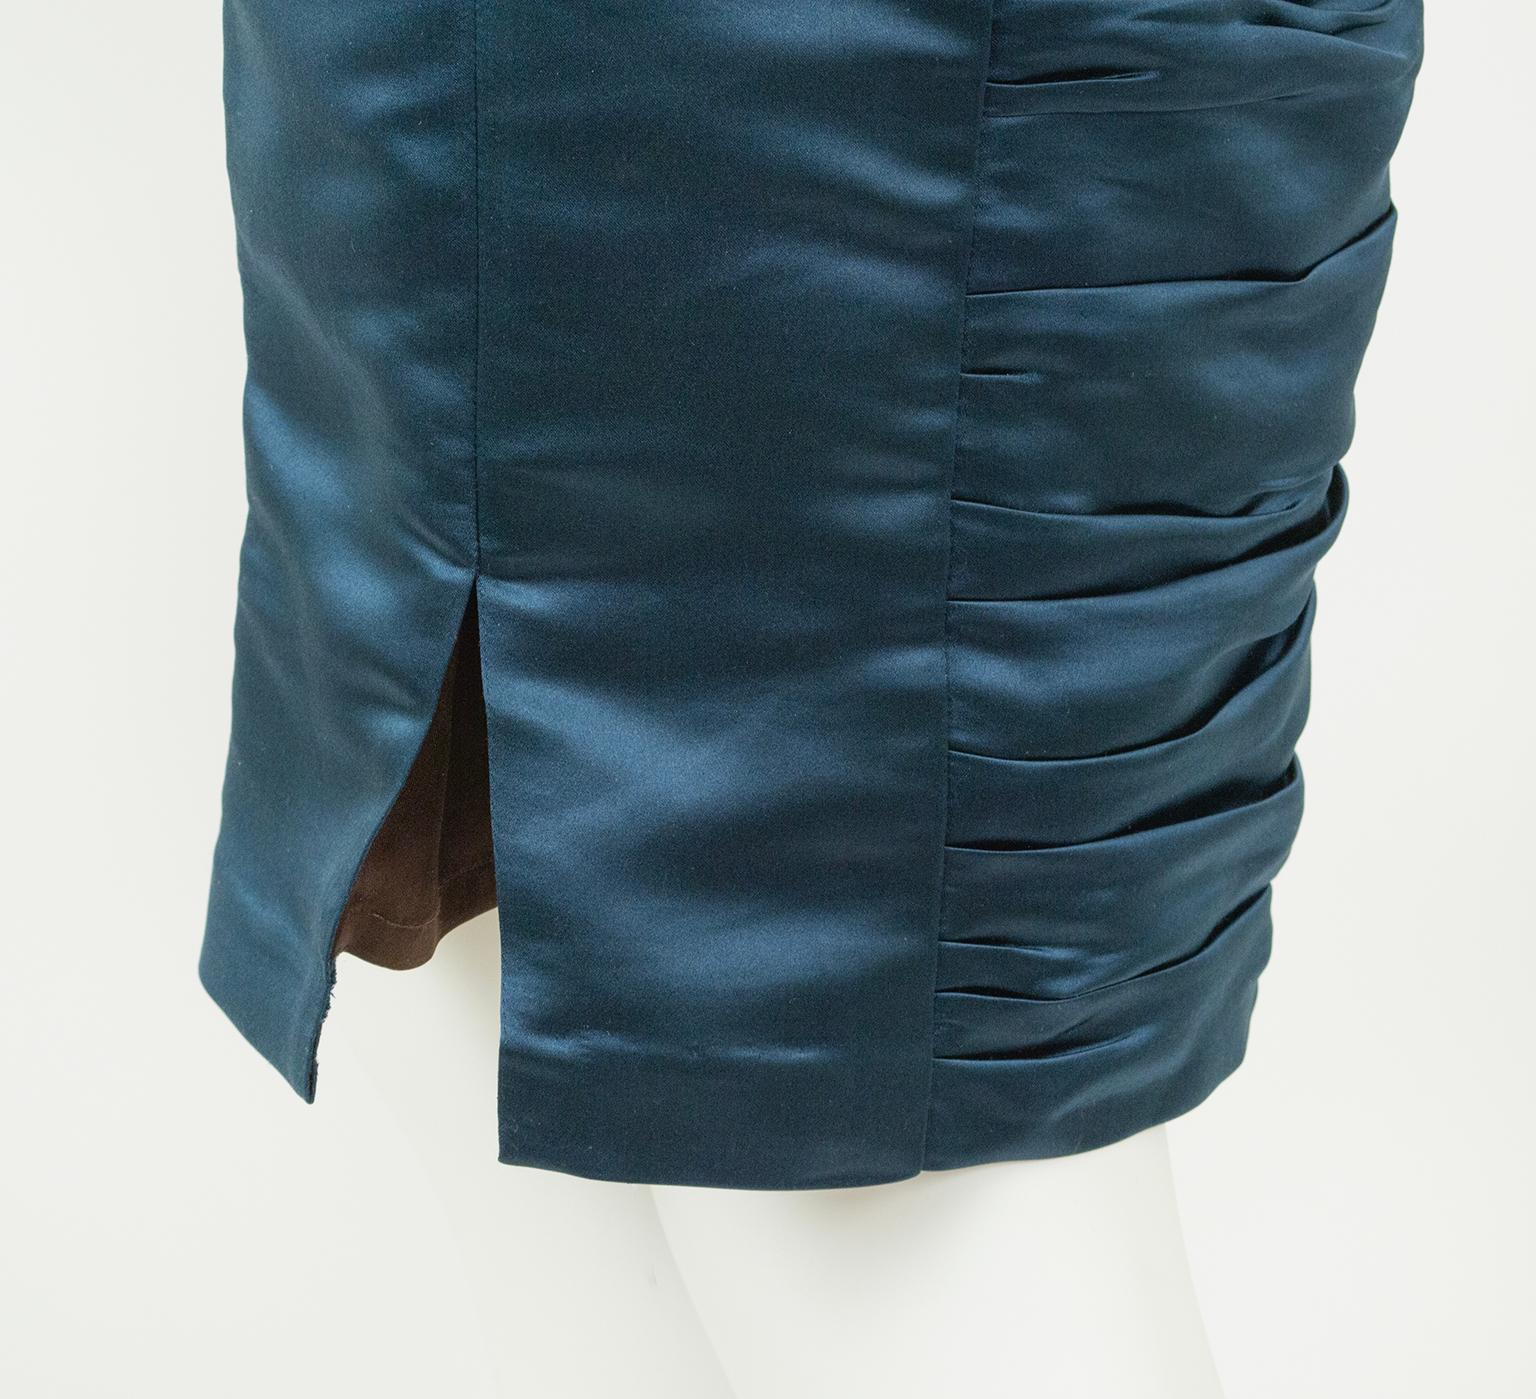 Milly Brown Satin Cone Bra Bolero and Petrol Ruched Pencil Skirt Suit - XS, 2002 For Sale 10